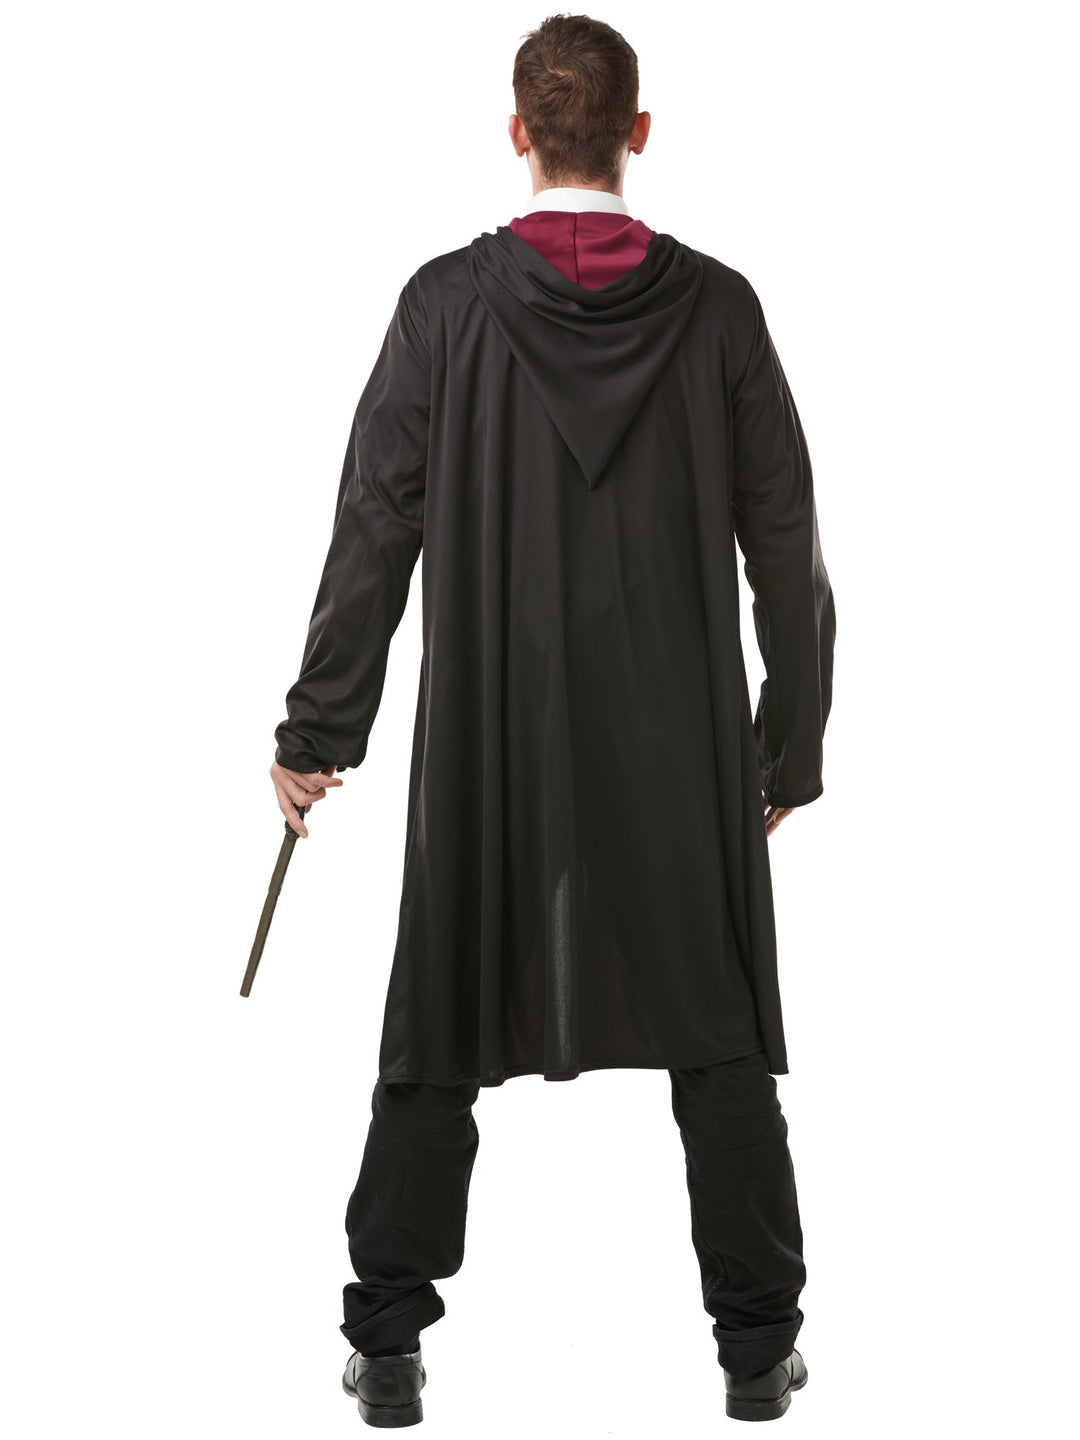 Gryffindor Robe Adults Costume Glasses Wand Harry Potter_3